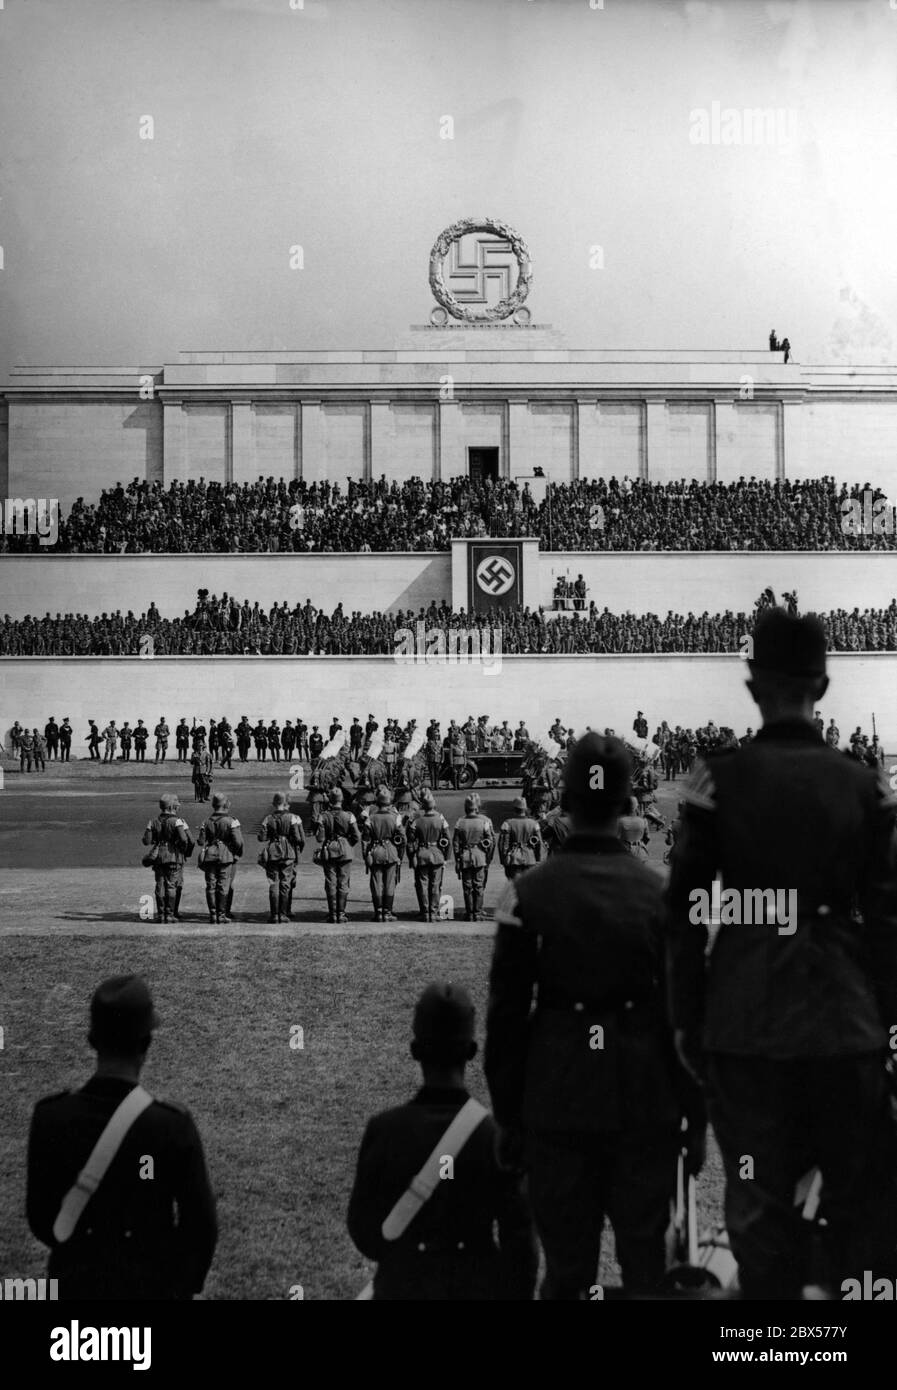 Adolf Hitler, standing in his Mercedes, takes the salute of the formations of the Reich Labor Service on the Zeppelin Field during the Nuremberg Rally. In the background, the Zeppelin grandstand. On the left edge of the picture and on the grandstand are film cameras. Stock Photo